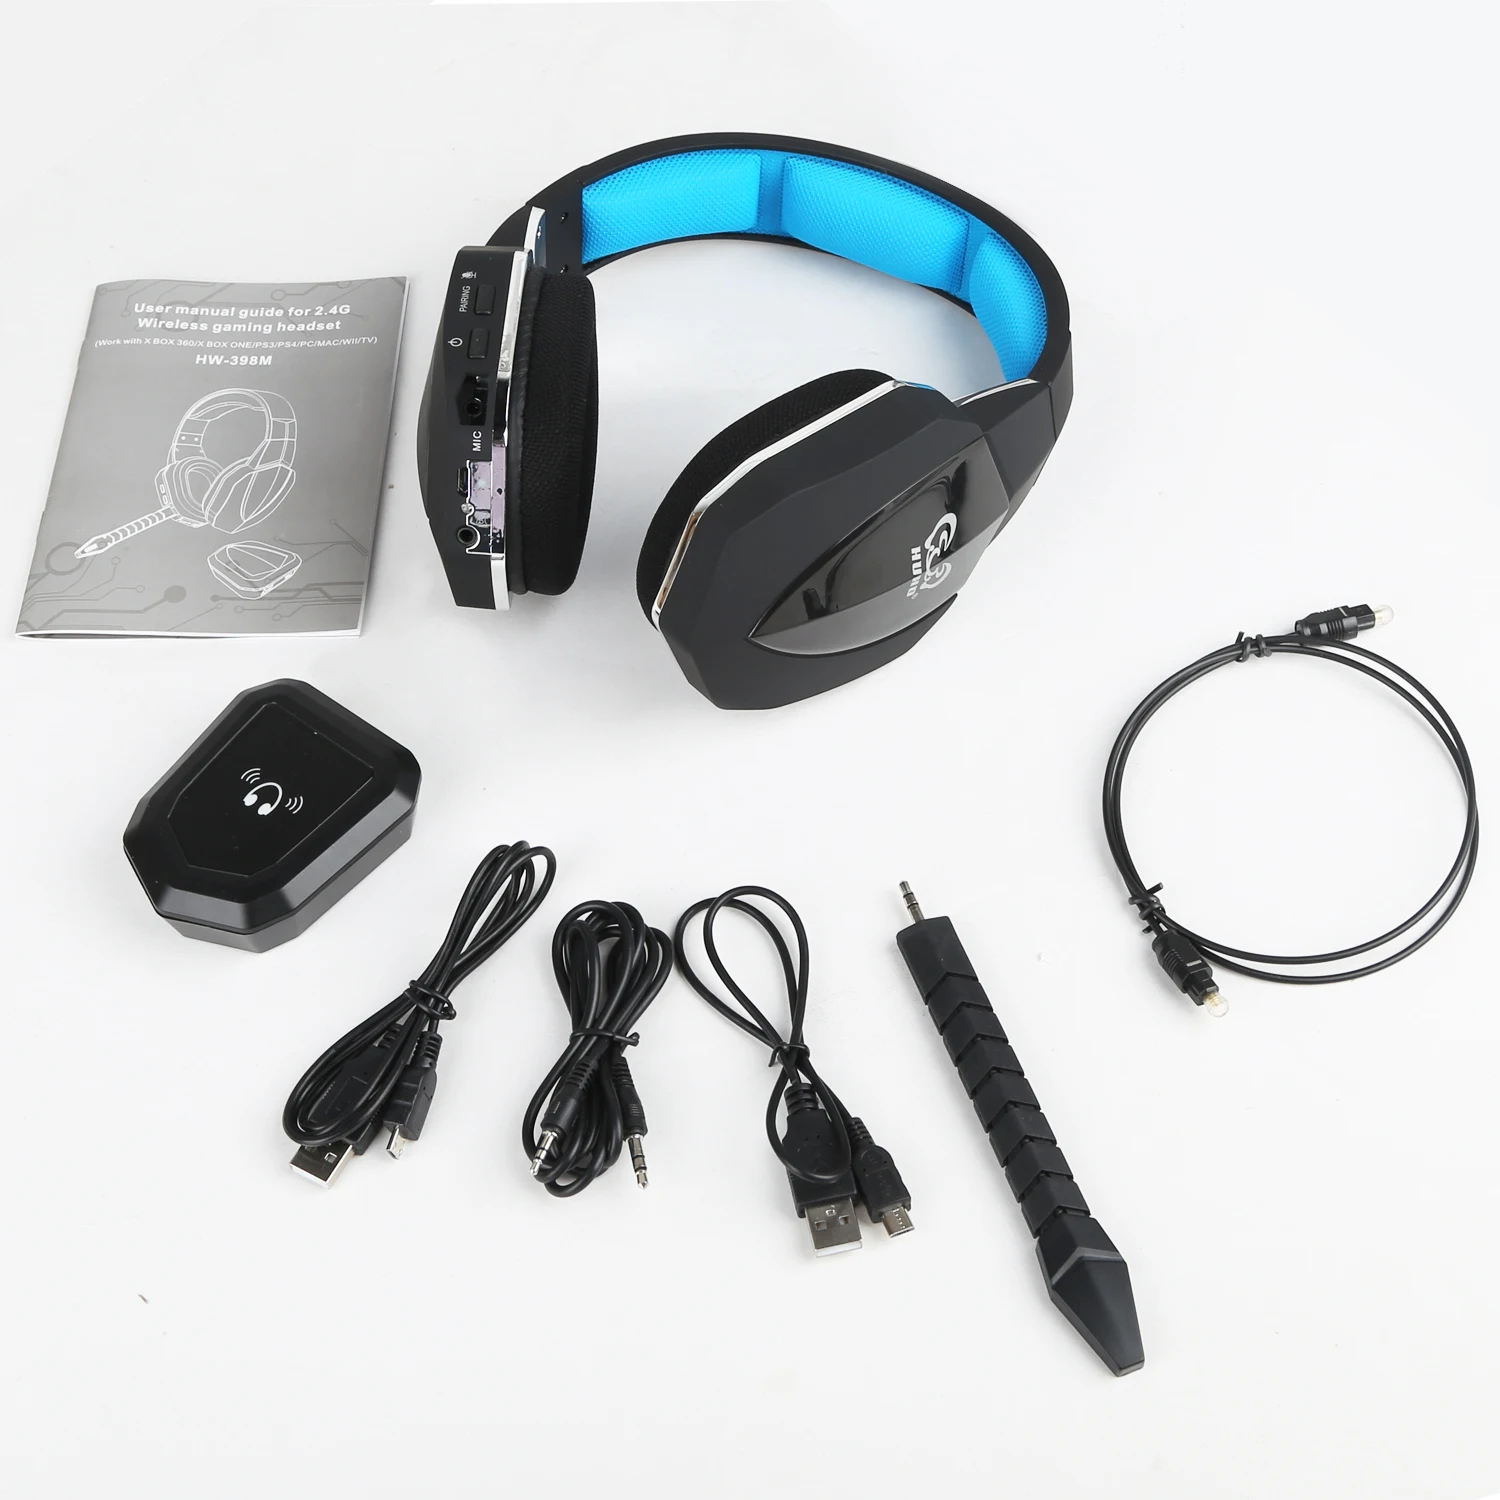 area famine of course 2.4g Wireless Gaming Removable Mic Headphone Over-ear Gaming Headset Good  Quality For Xbox One Pc Ps3 Xbox 360 Ps4 - Buy Multi-function Wireless  Gaming Headphone For Xbox One Ps4,2.4ghz Wireless Pc Gaming